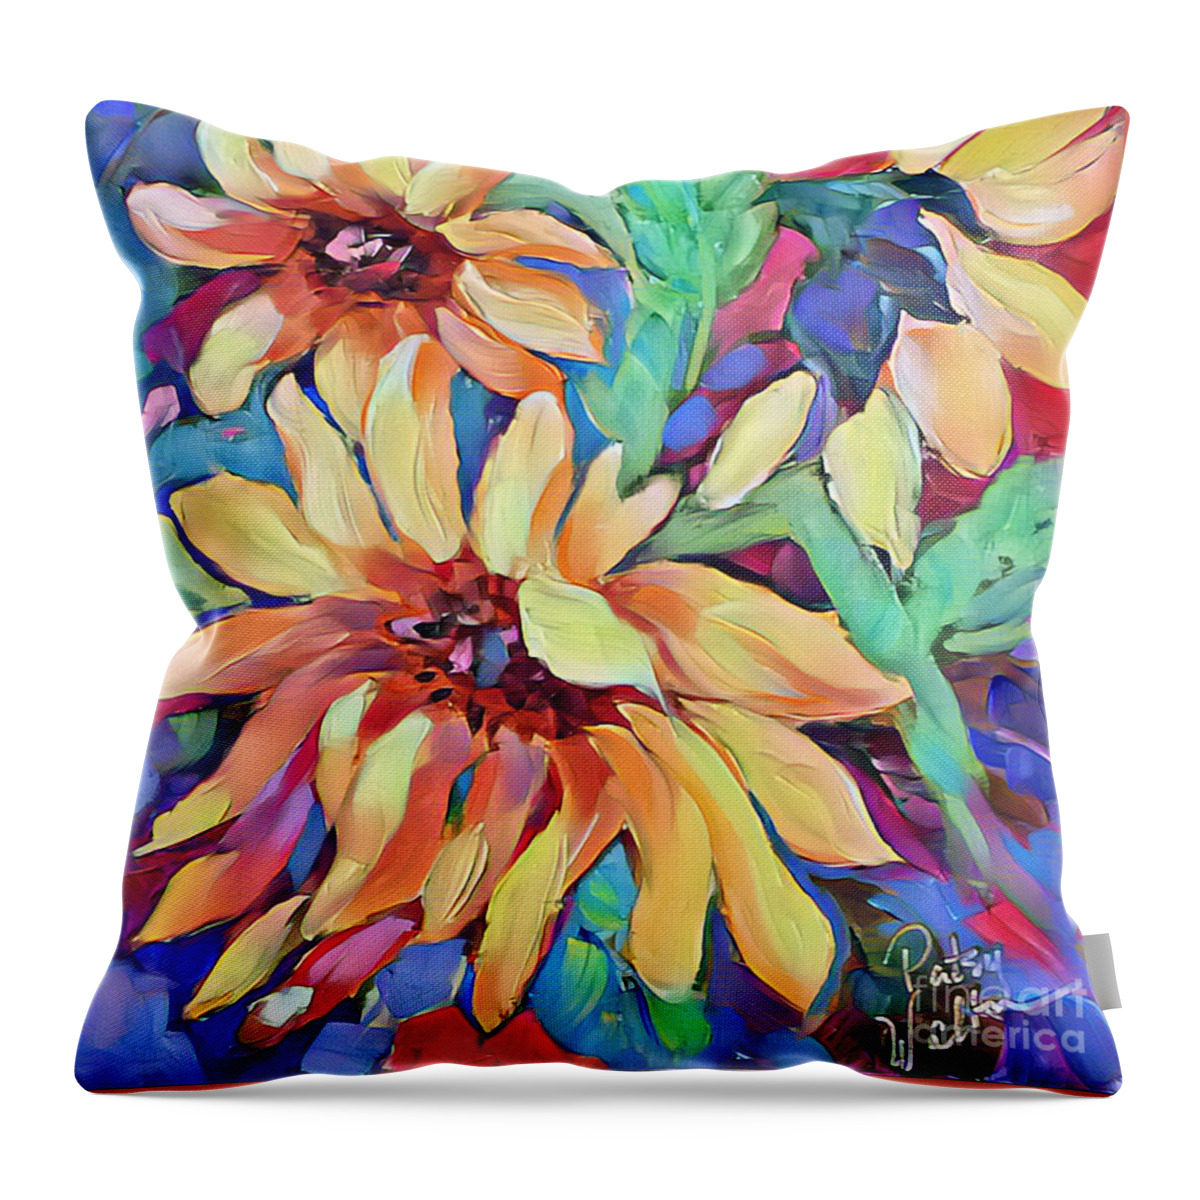  Throw Pillow featuring the painting Trio #2 by Patsy Walton